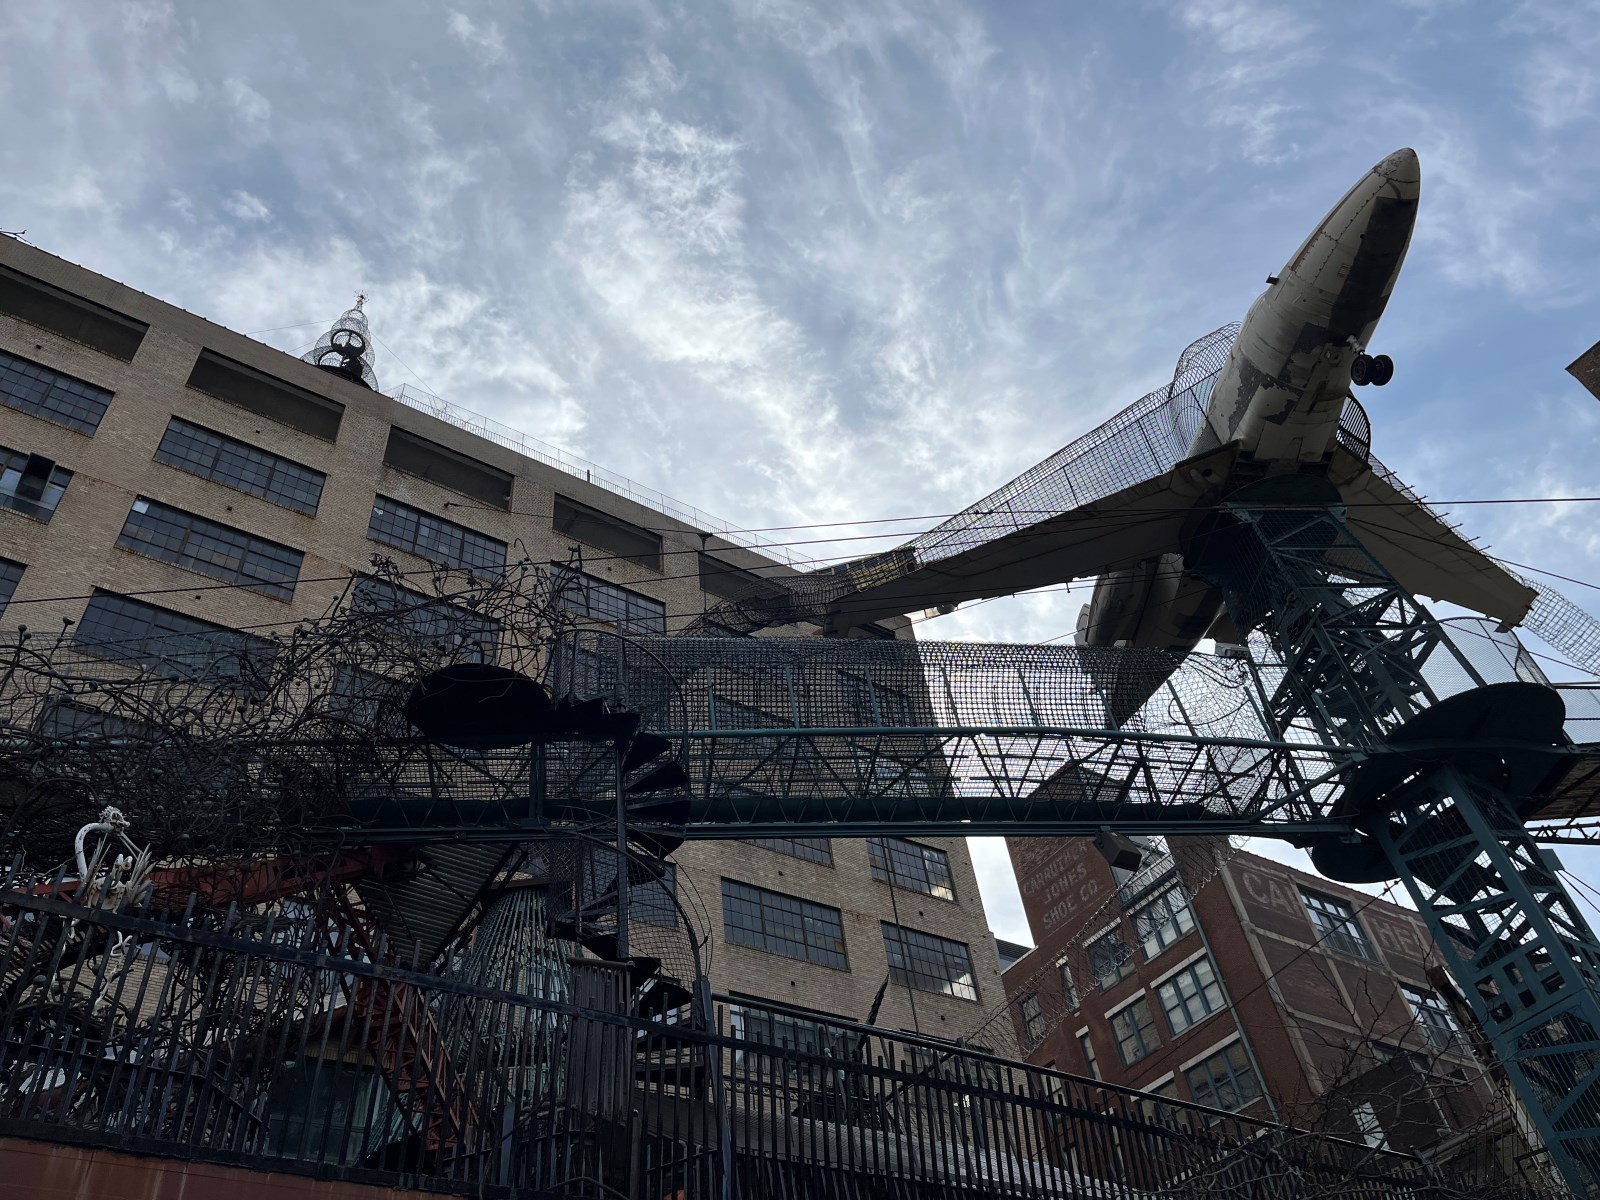 Looking up at the City Museum